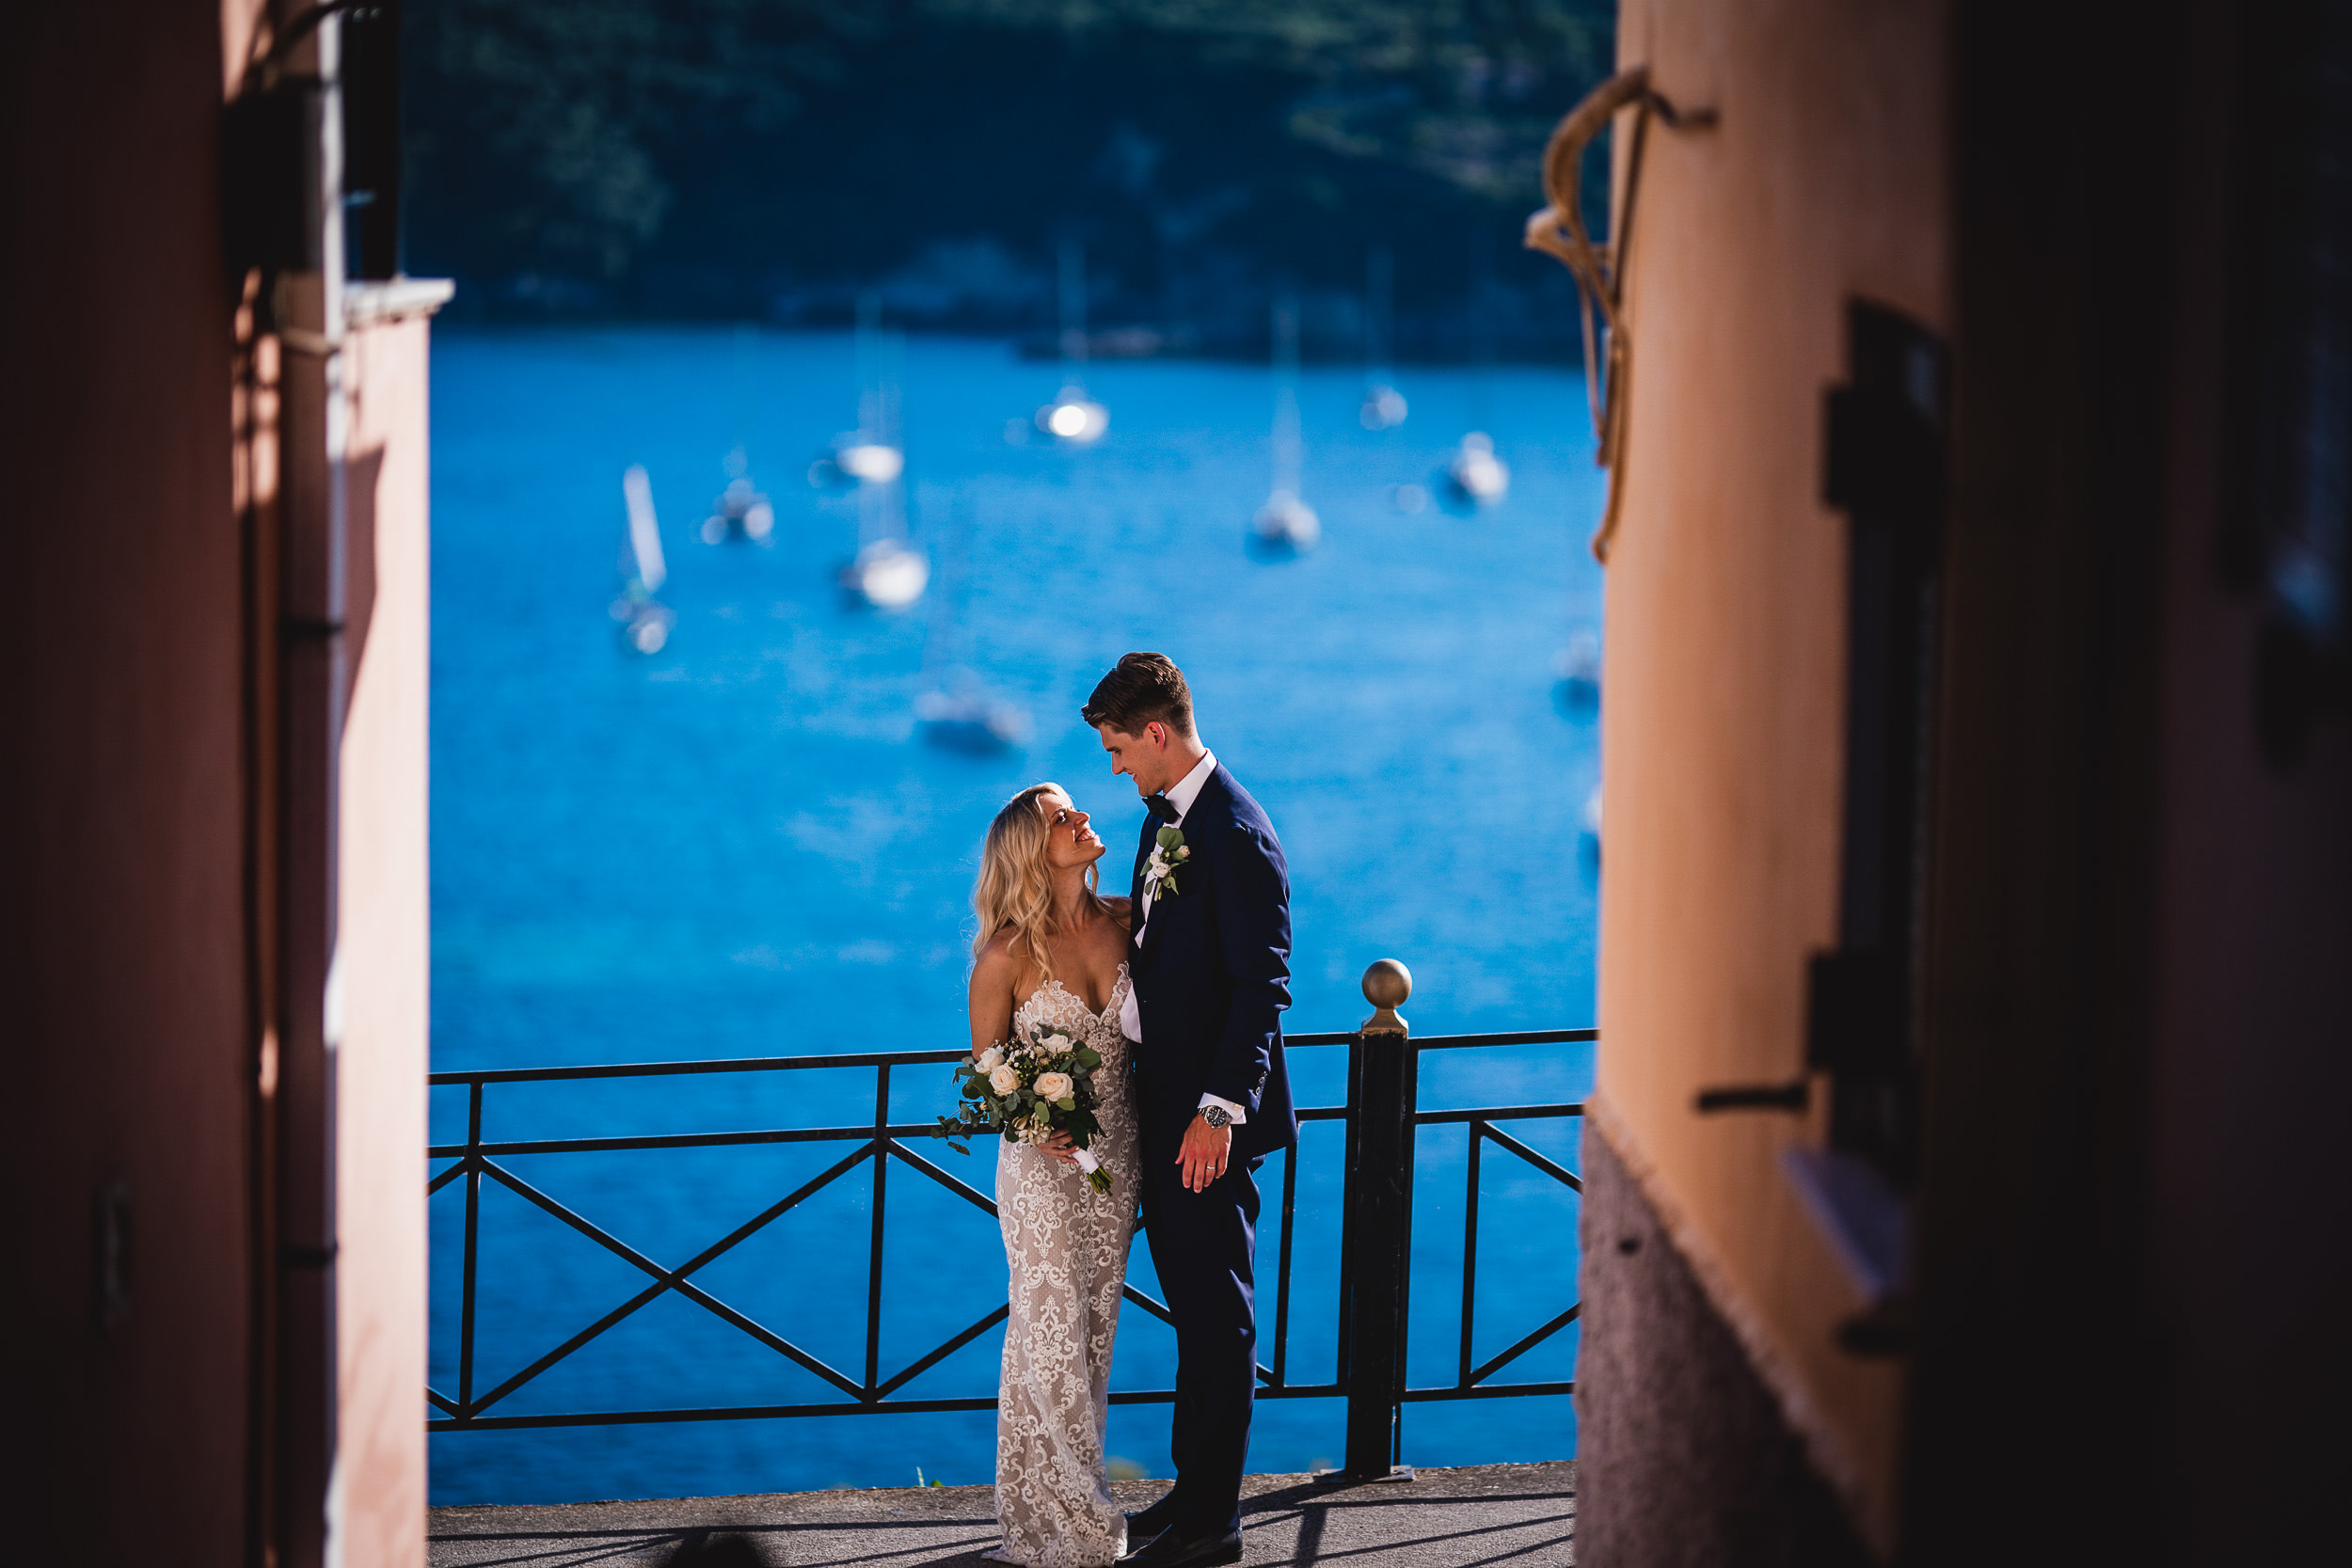 A wedding photographer capturing a bride and groom in an alleyway with boats in the background.